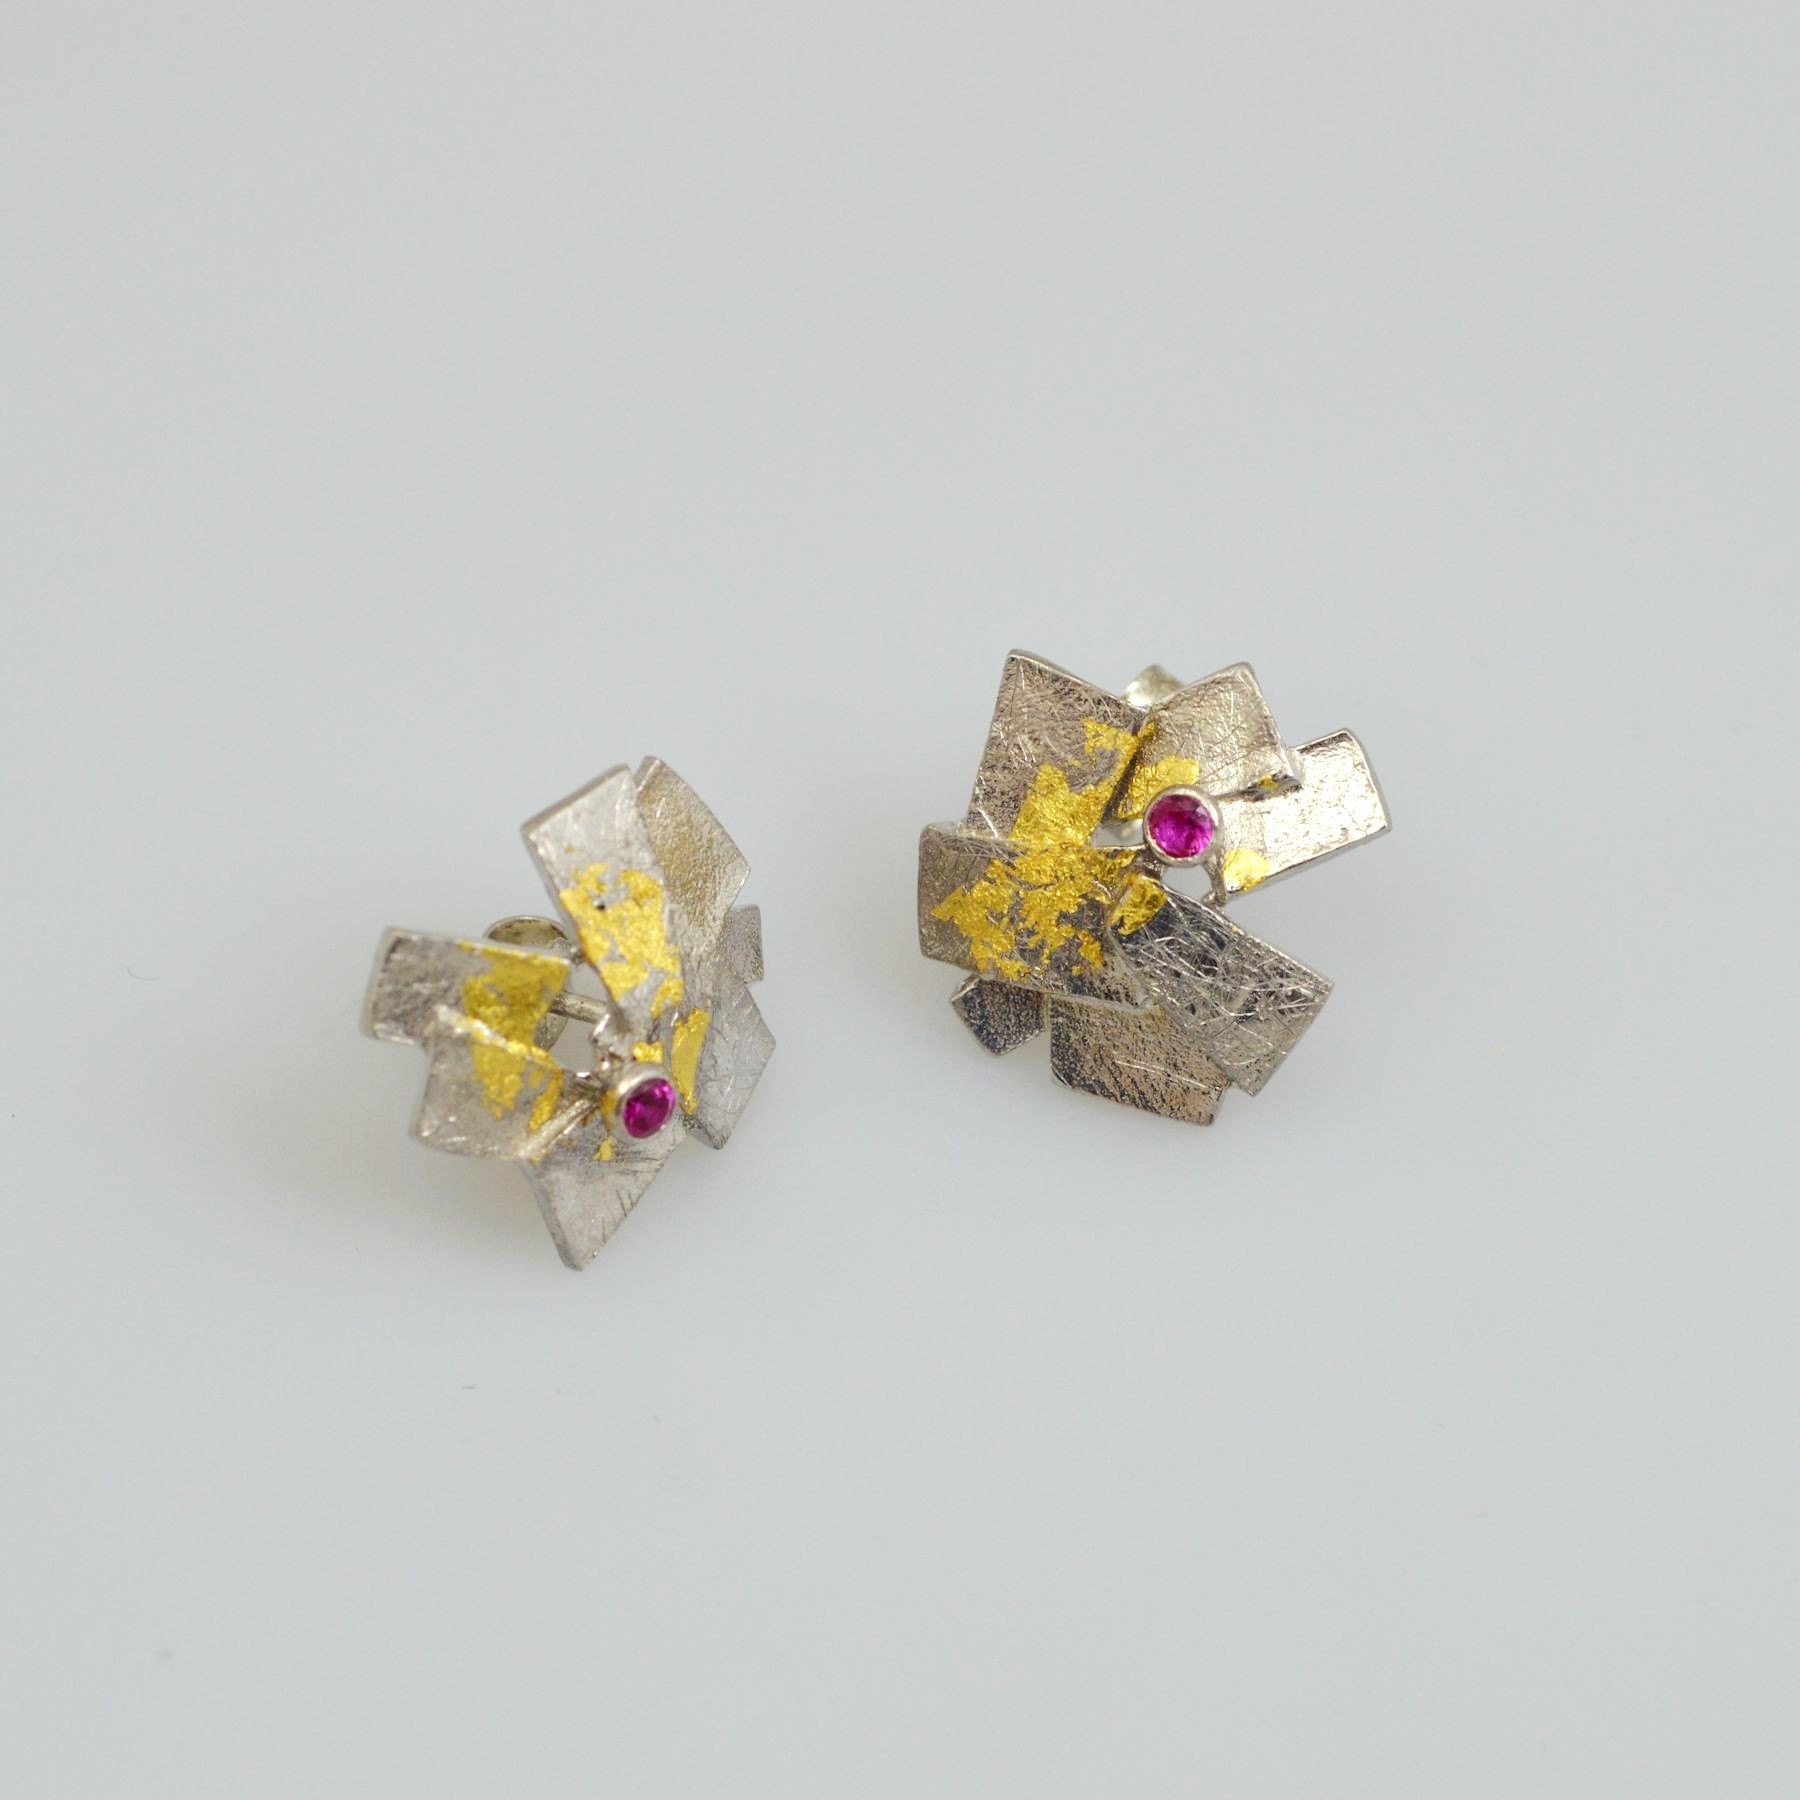 Silver earrings 925 rhodium plated with gold leaf 22K and synthetic stones